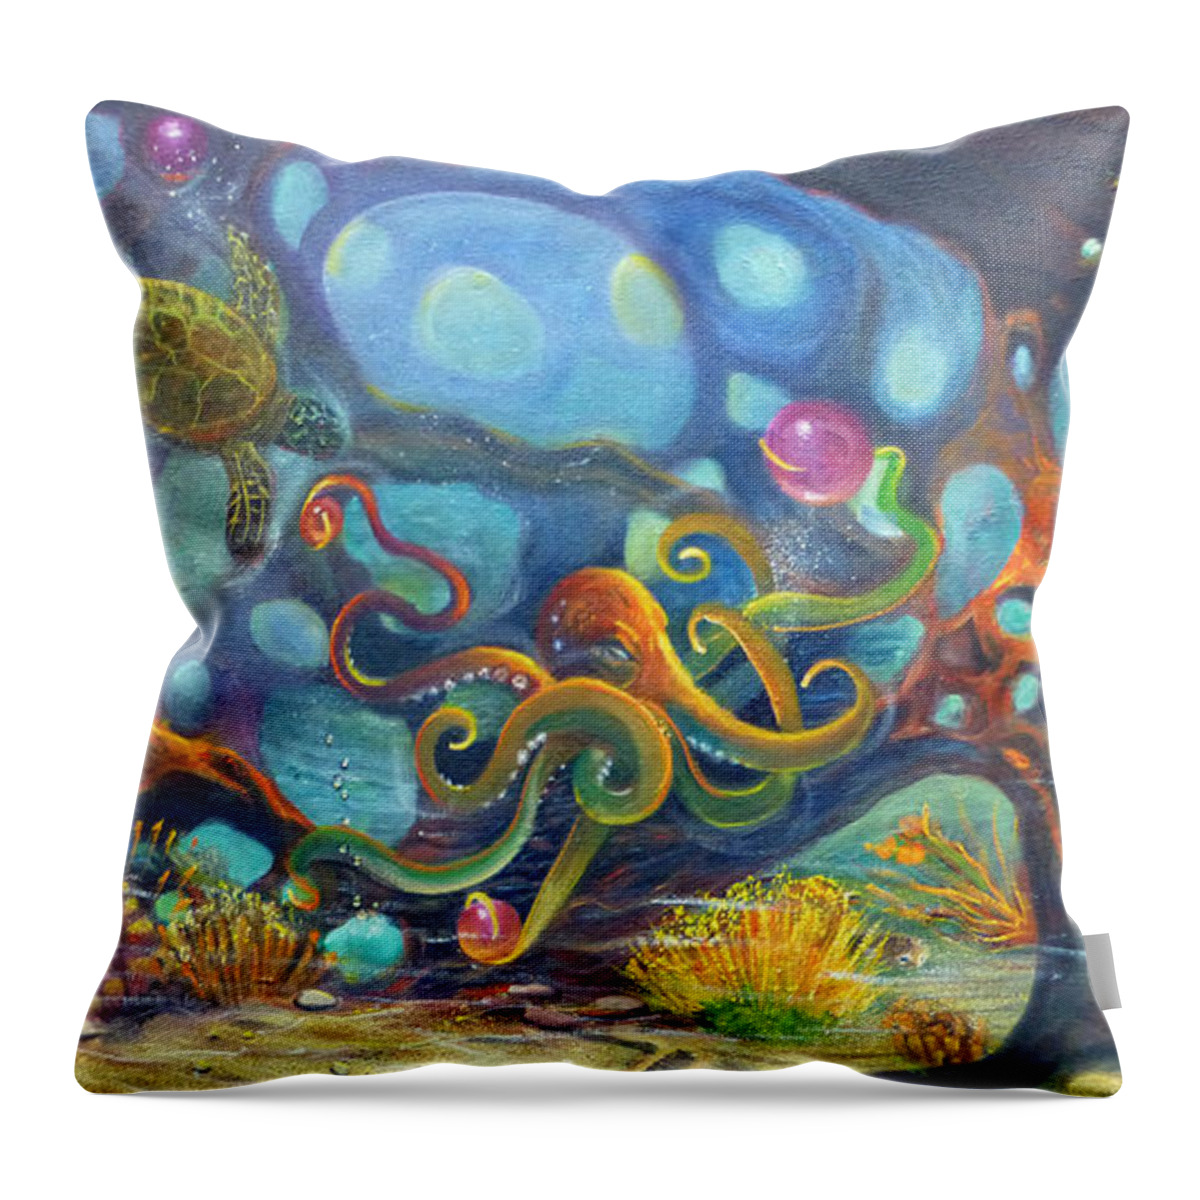 Juggle Throw Pillow featuring the painting The Juggler by Claudia Goodell